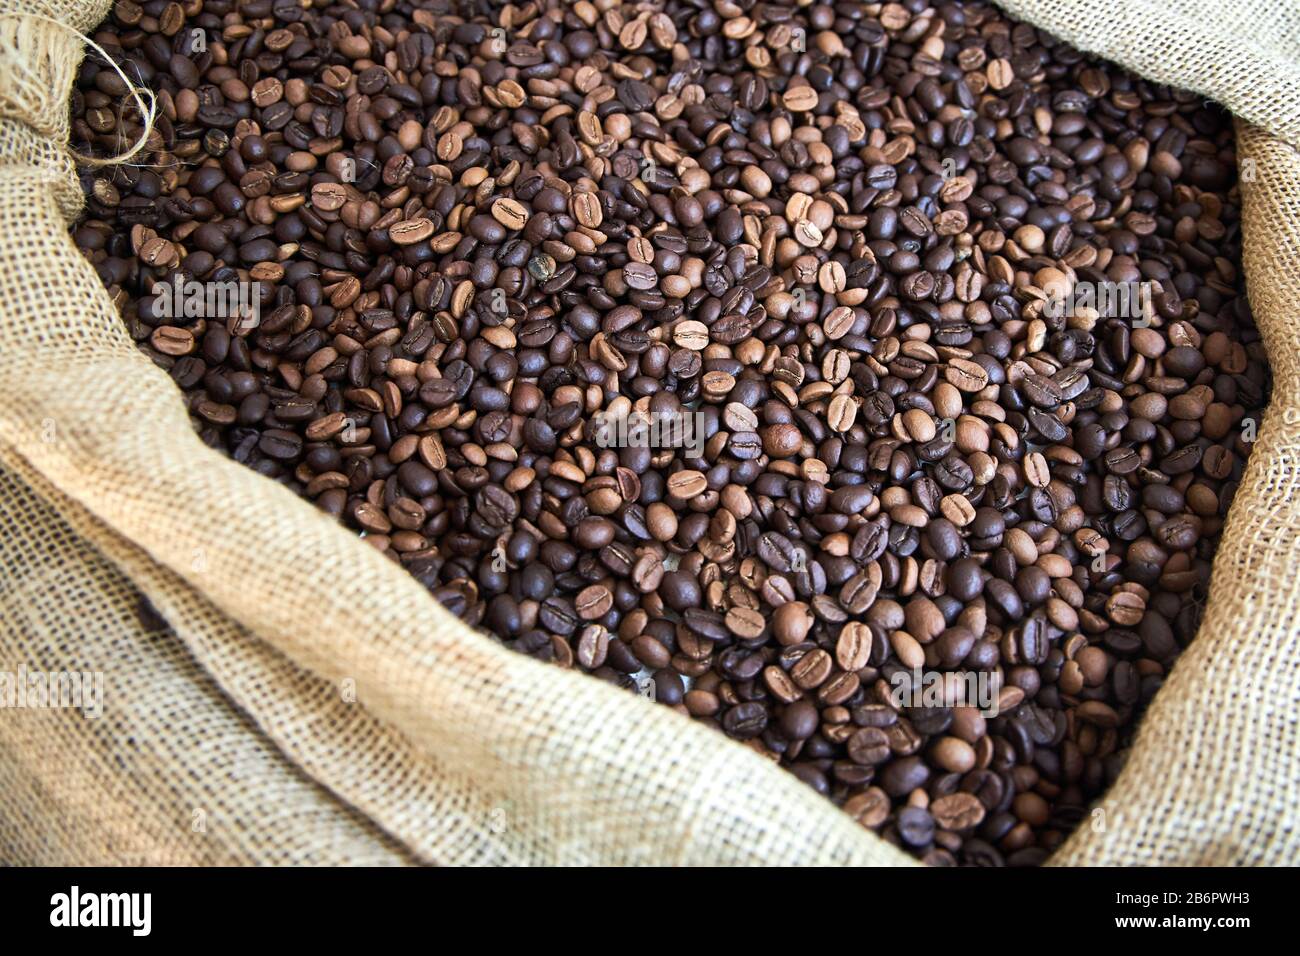 Big cloth bag filled of roasted coffee beans Stock Photo - Alamy